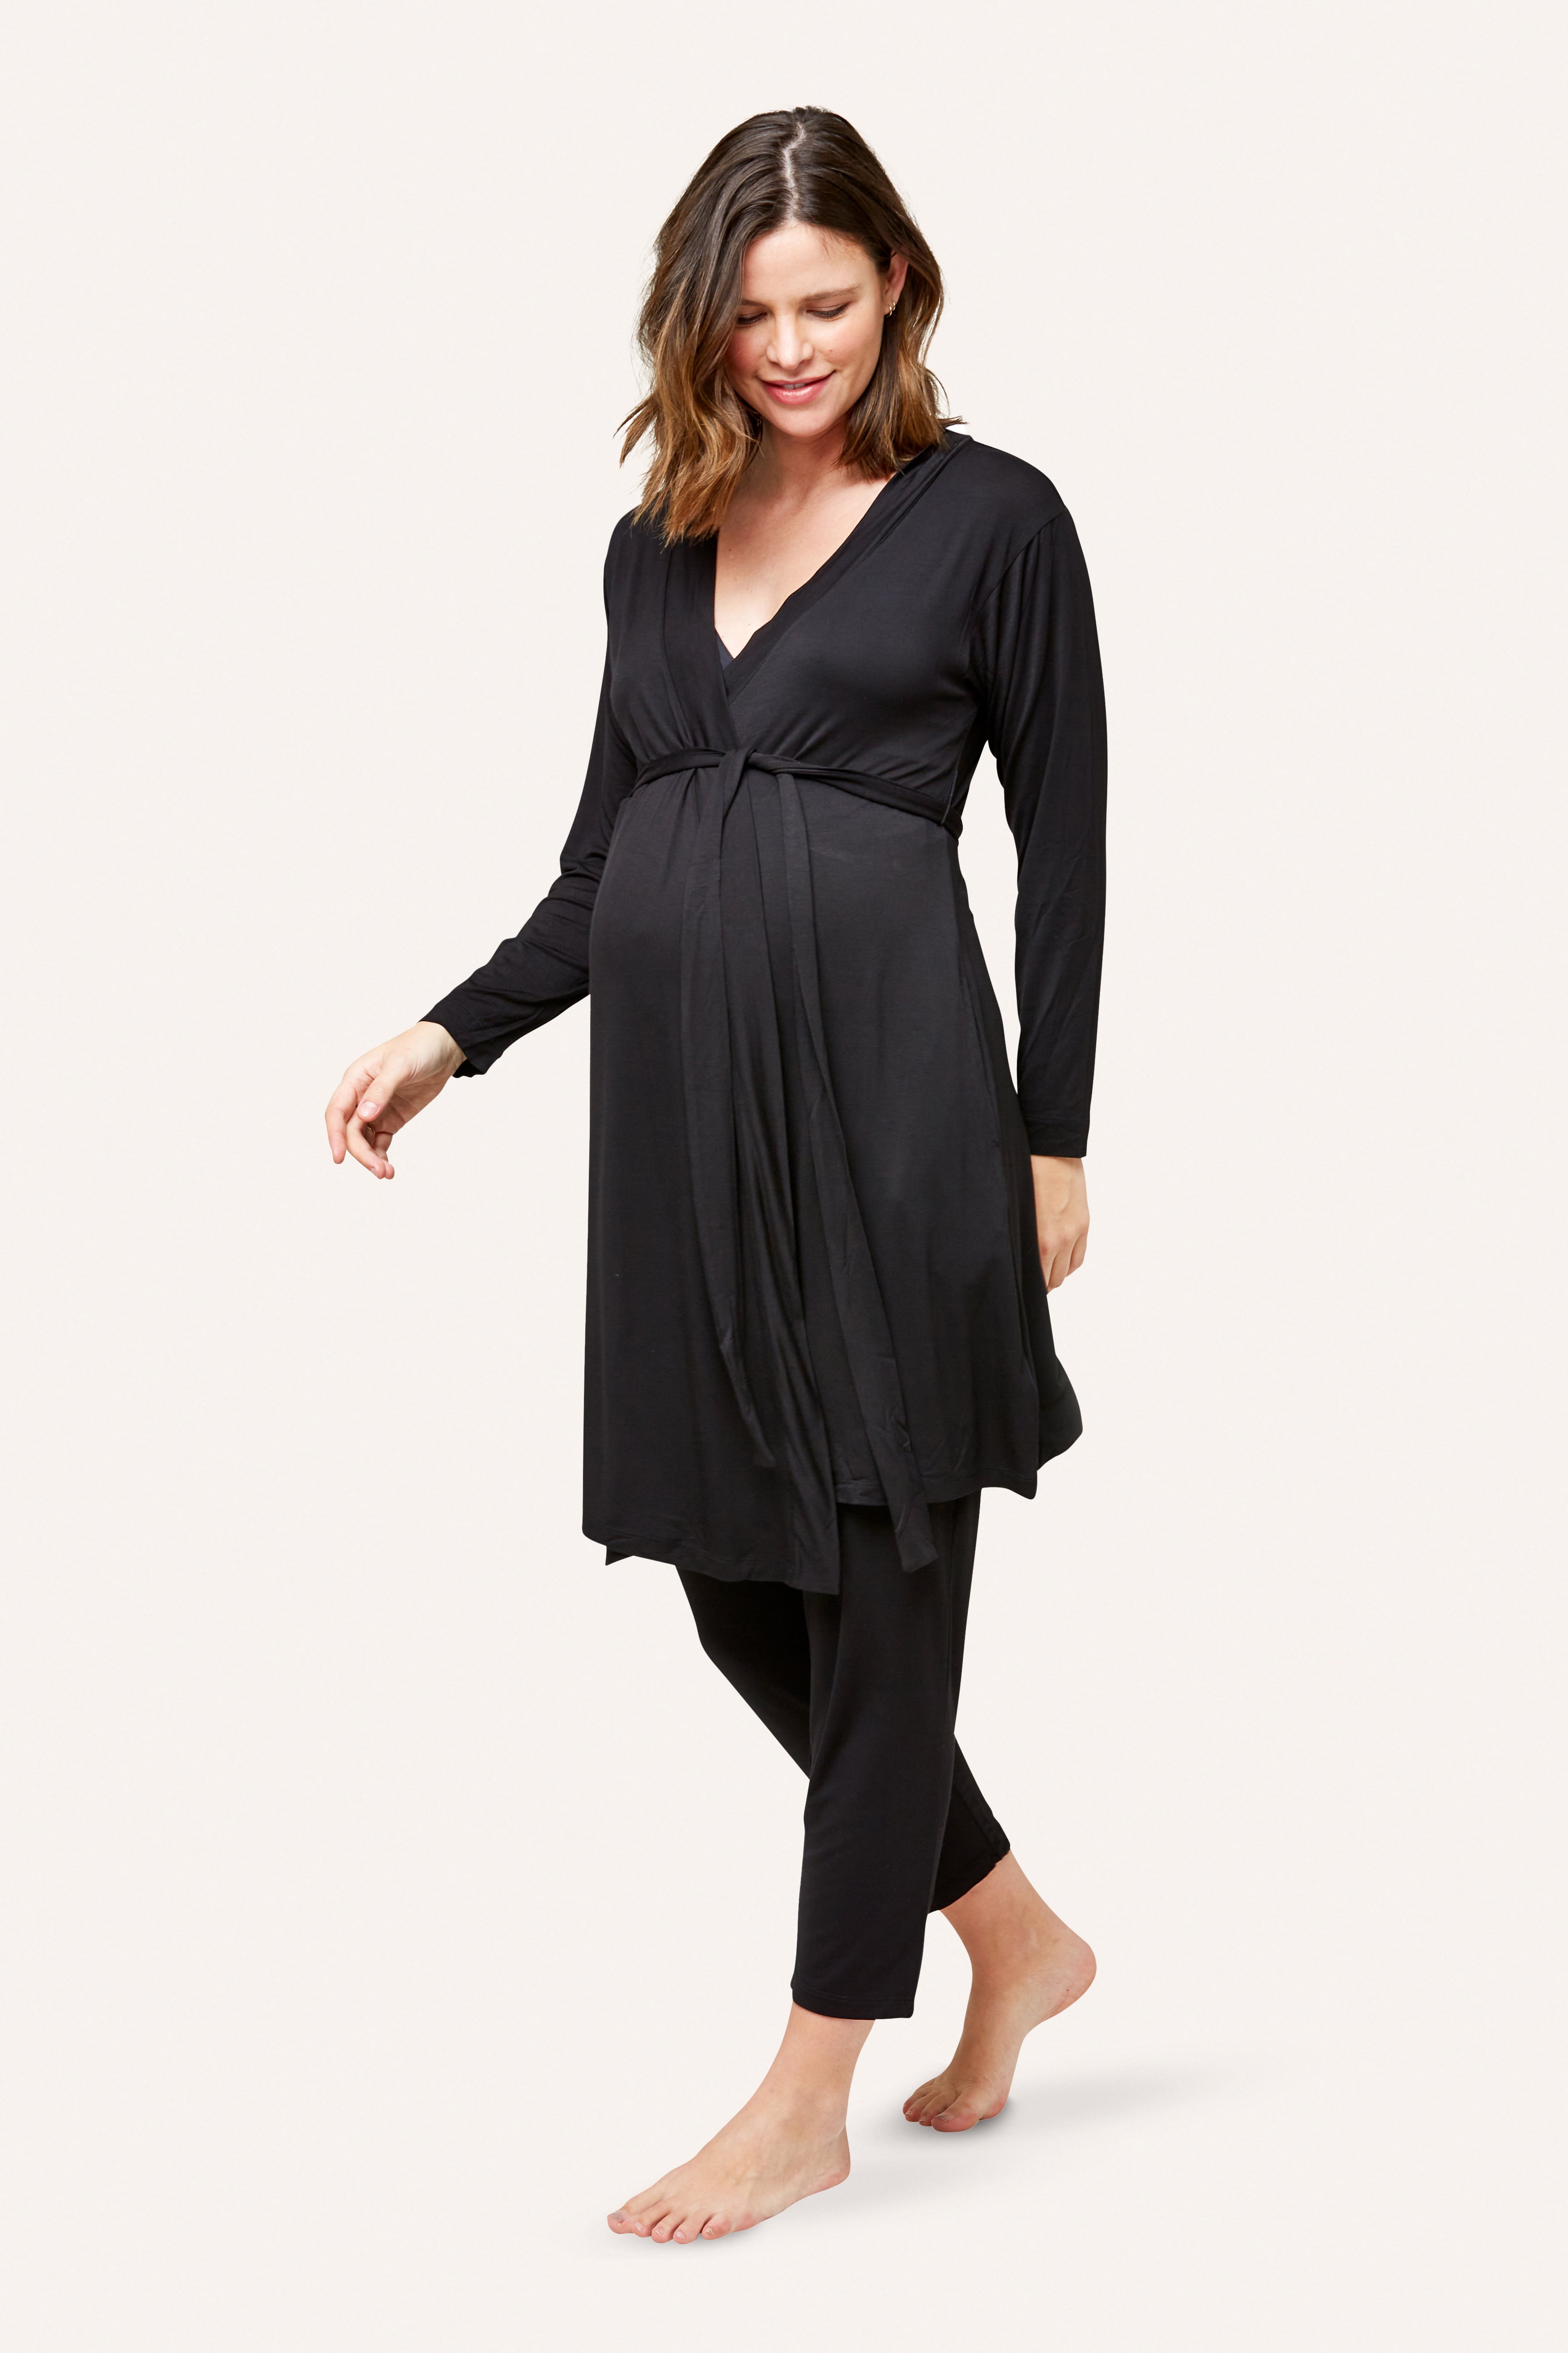 Leopard Labor Delivery Robe Nursing Nightgown – Glamix Maternity